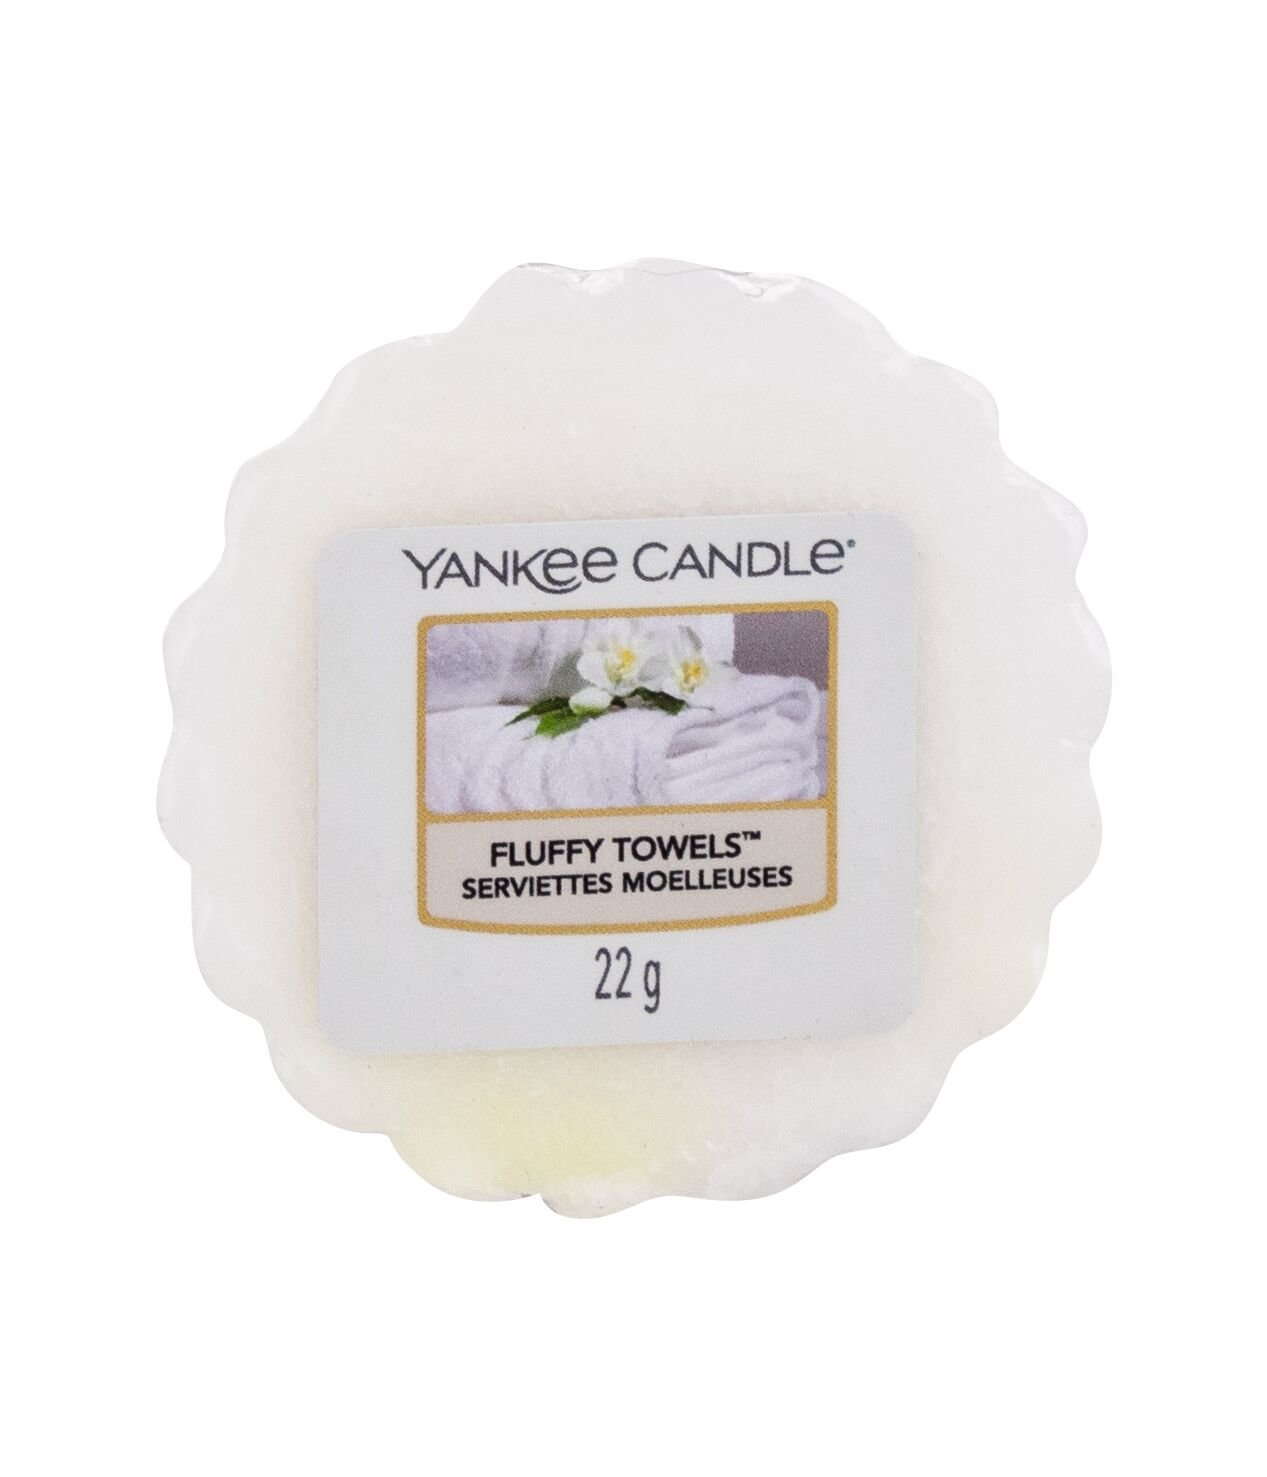 Yankee Candle Fluffy Towels 22g Kvepalai Unisex Scented Candle